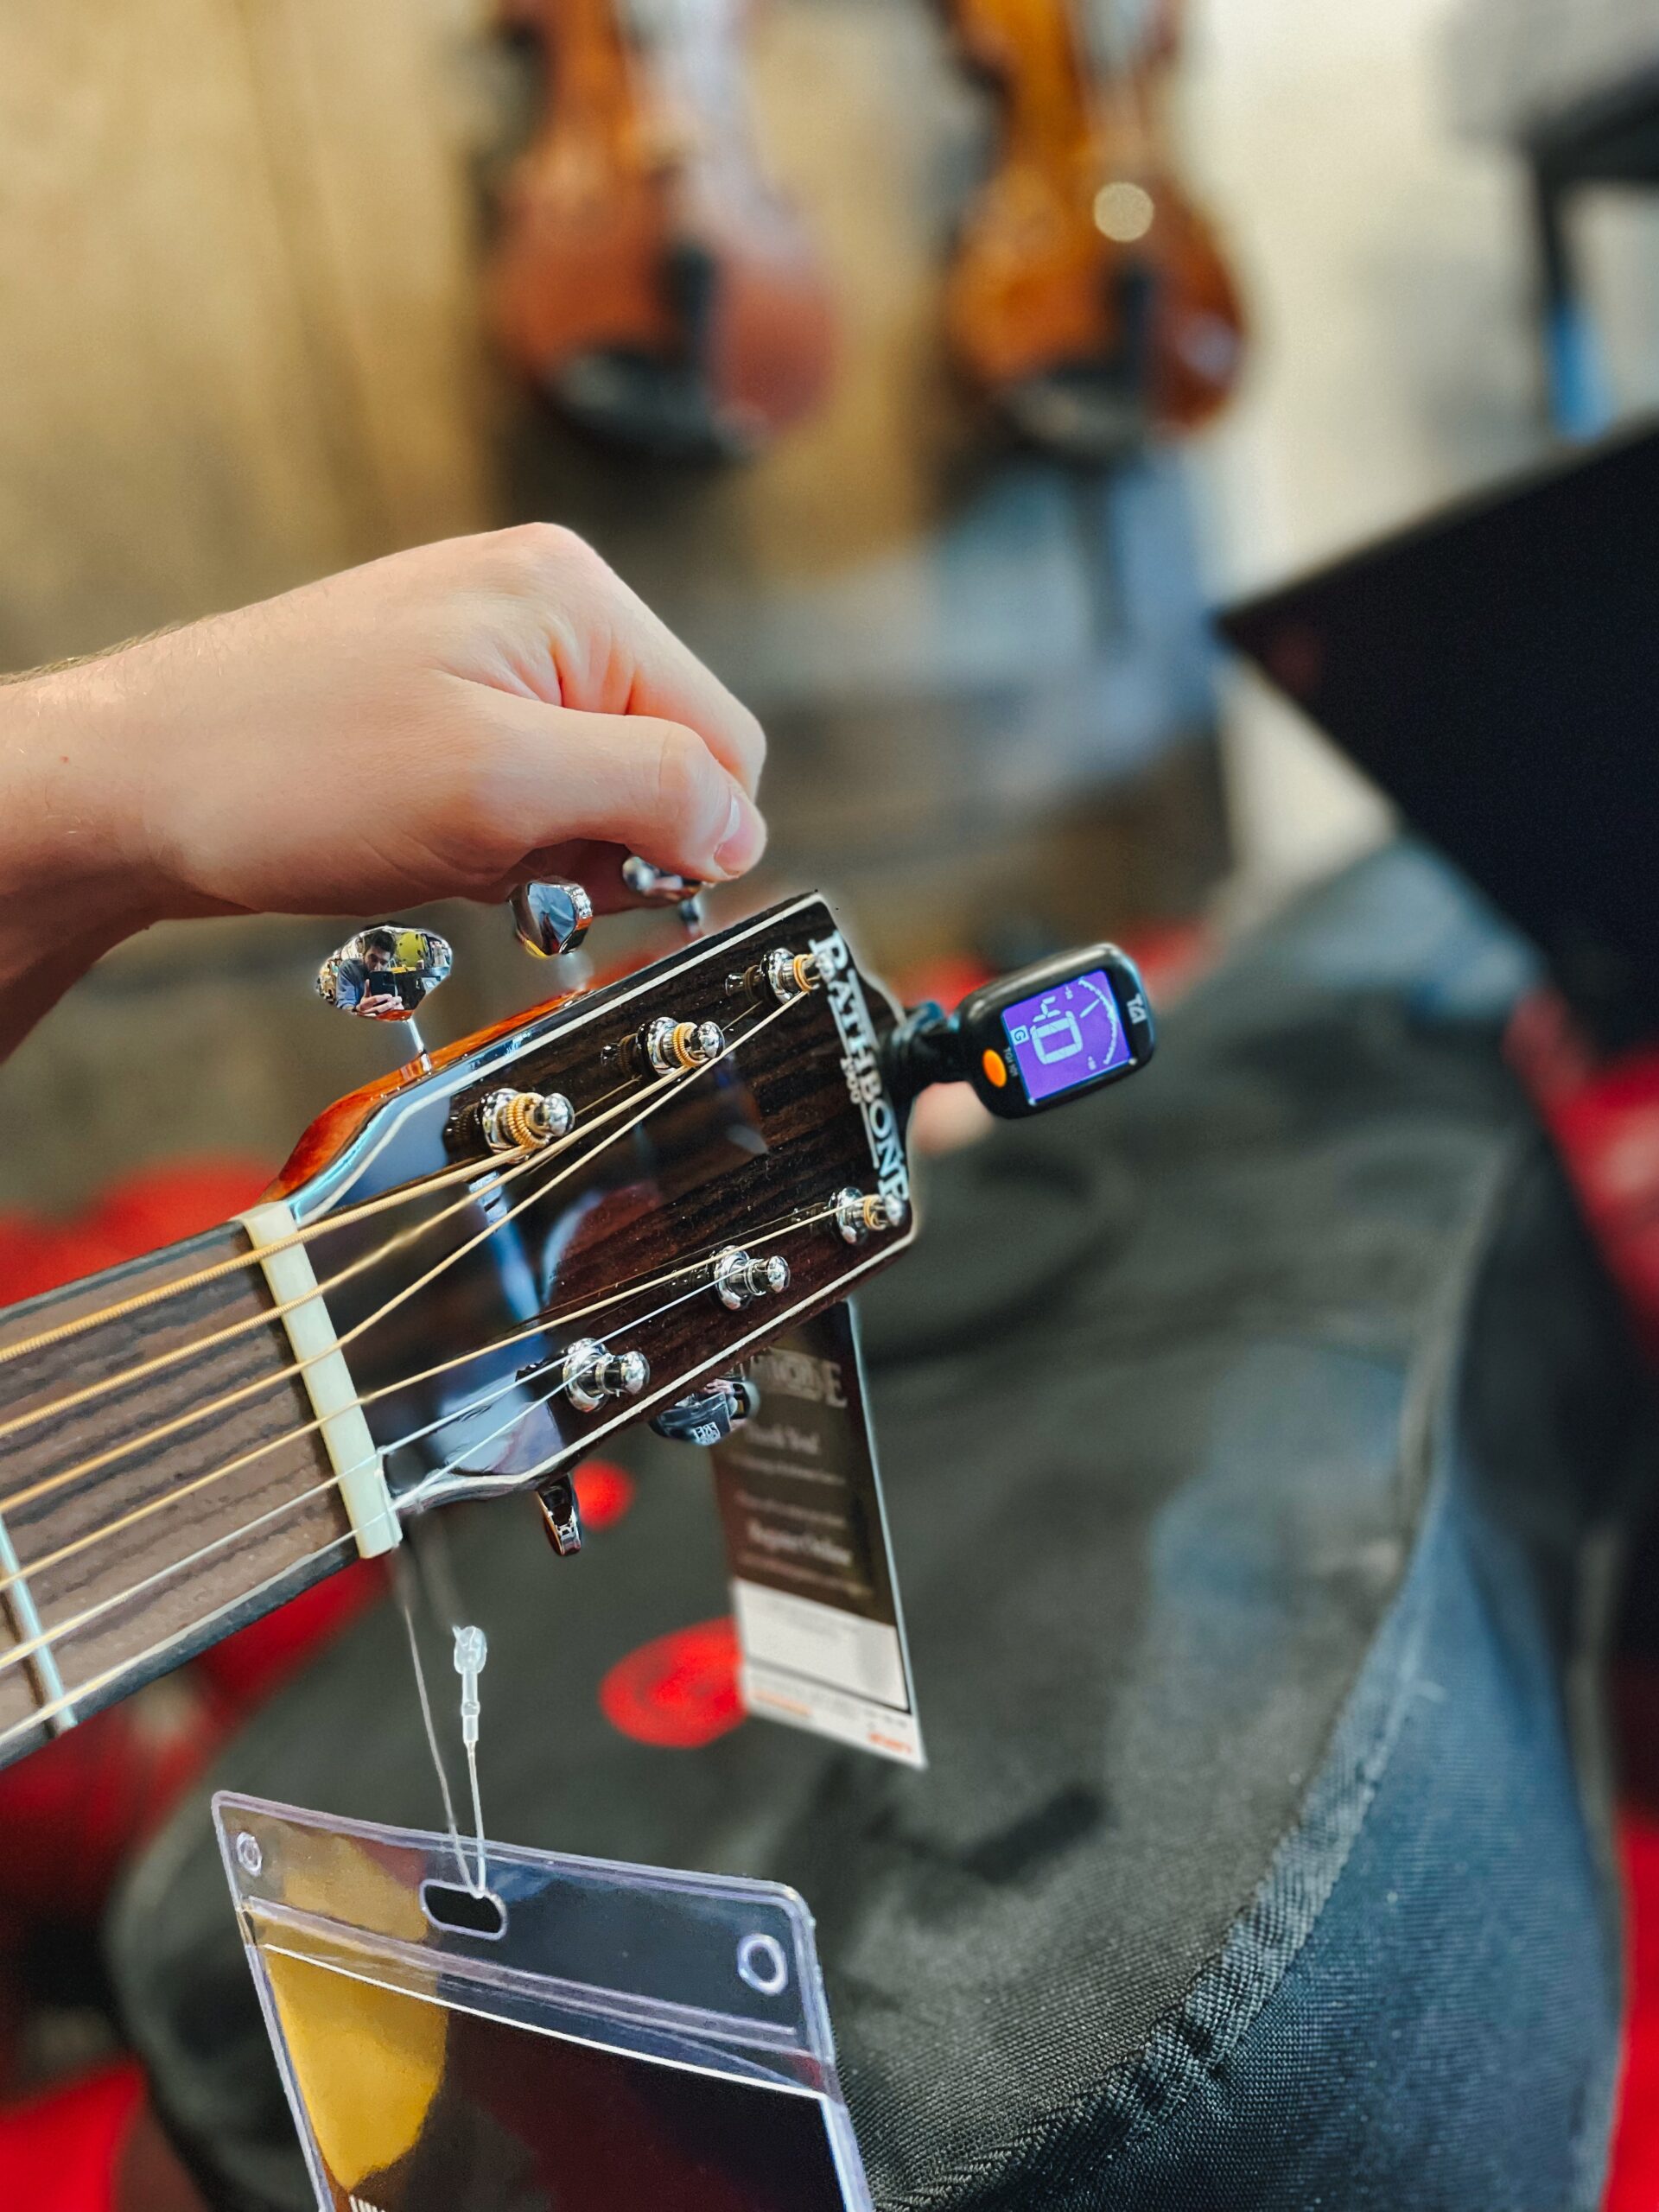 Guitar Accessories - tuning with clip-on tuner in a music shop. Finding D chord